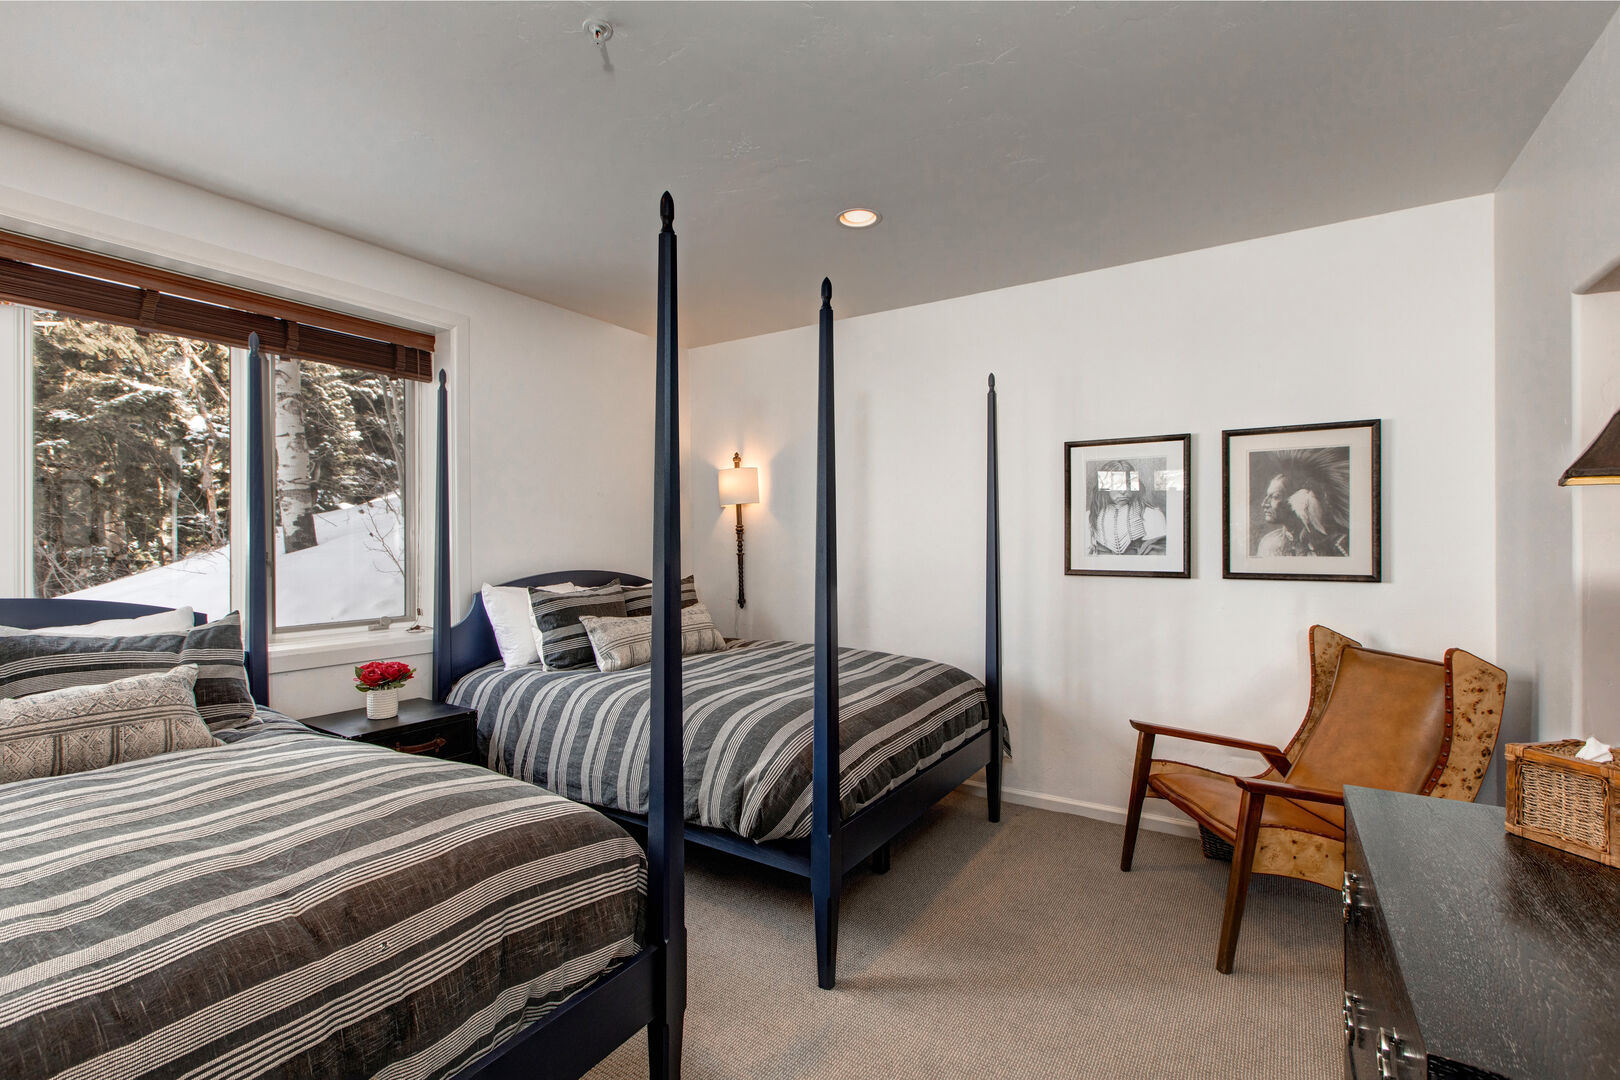 Lower level bedroom has matching four-poster queen beds; Wood blinds and spectacular western views from this end-unit townhome.